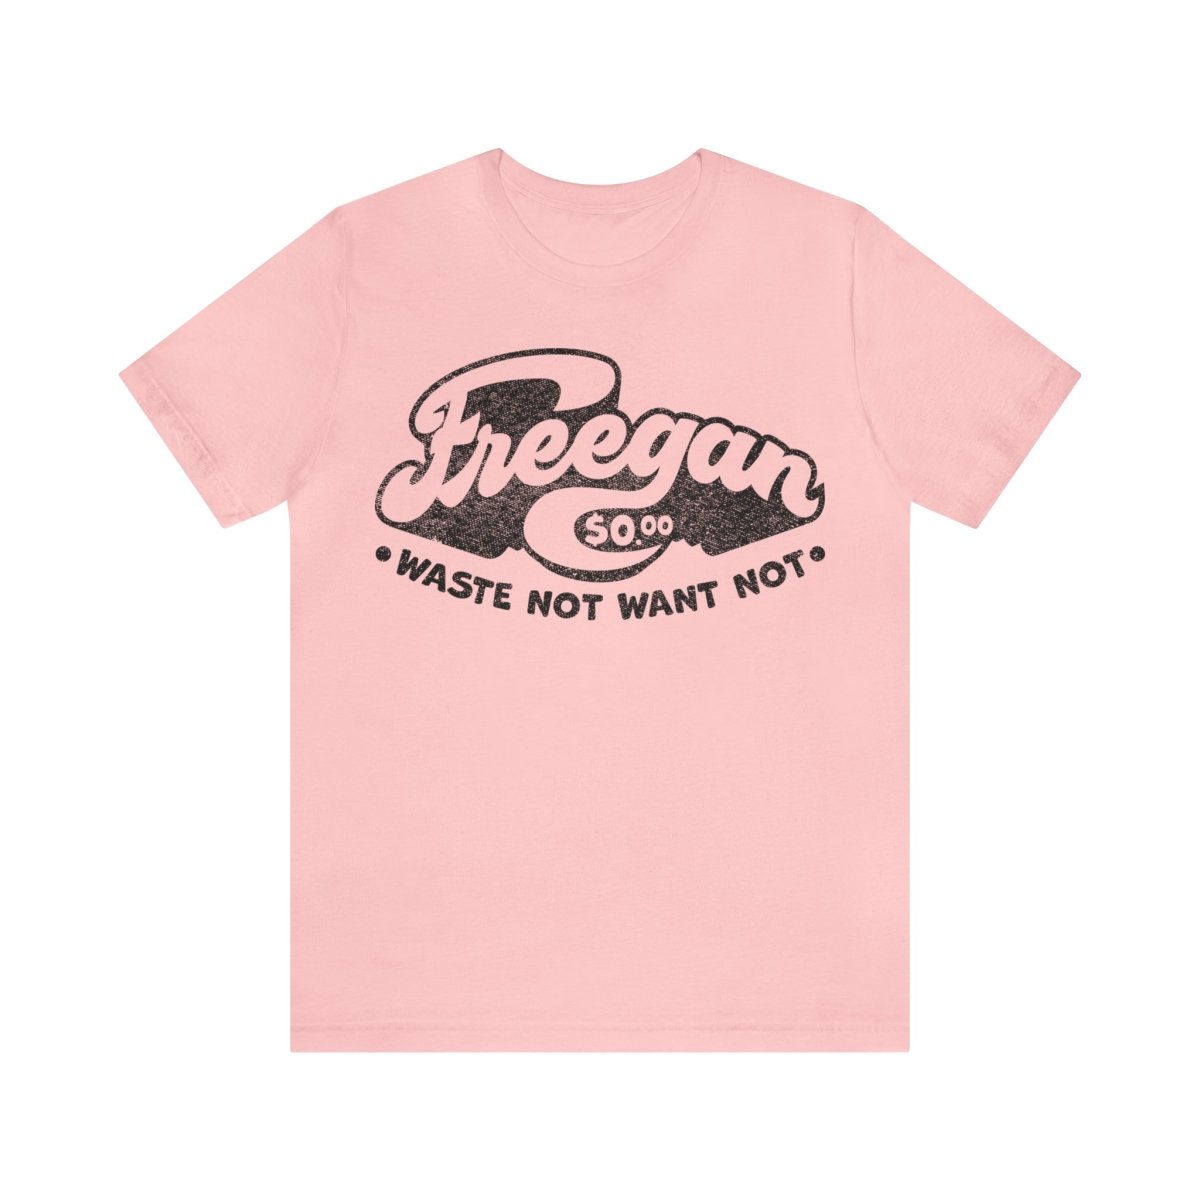 Freegan Premium T-Shirt, Reduce Reuse Recycle, Waste Not Want Not